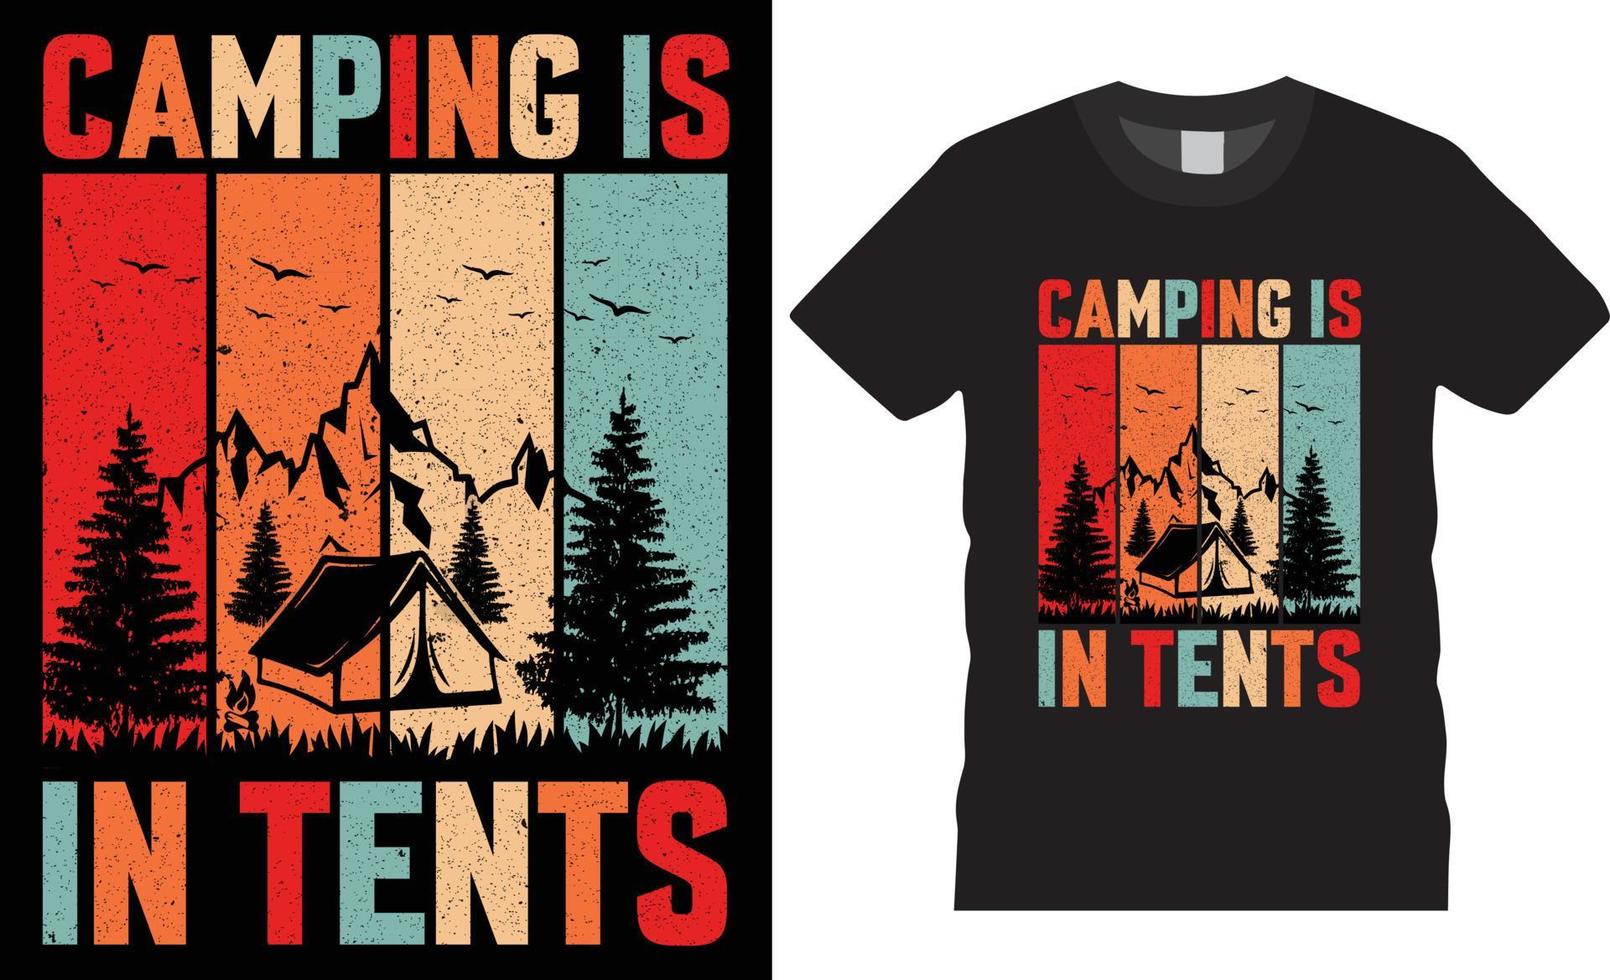 Camping creative t-shirt design vector. Camping Is In Tents vector